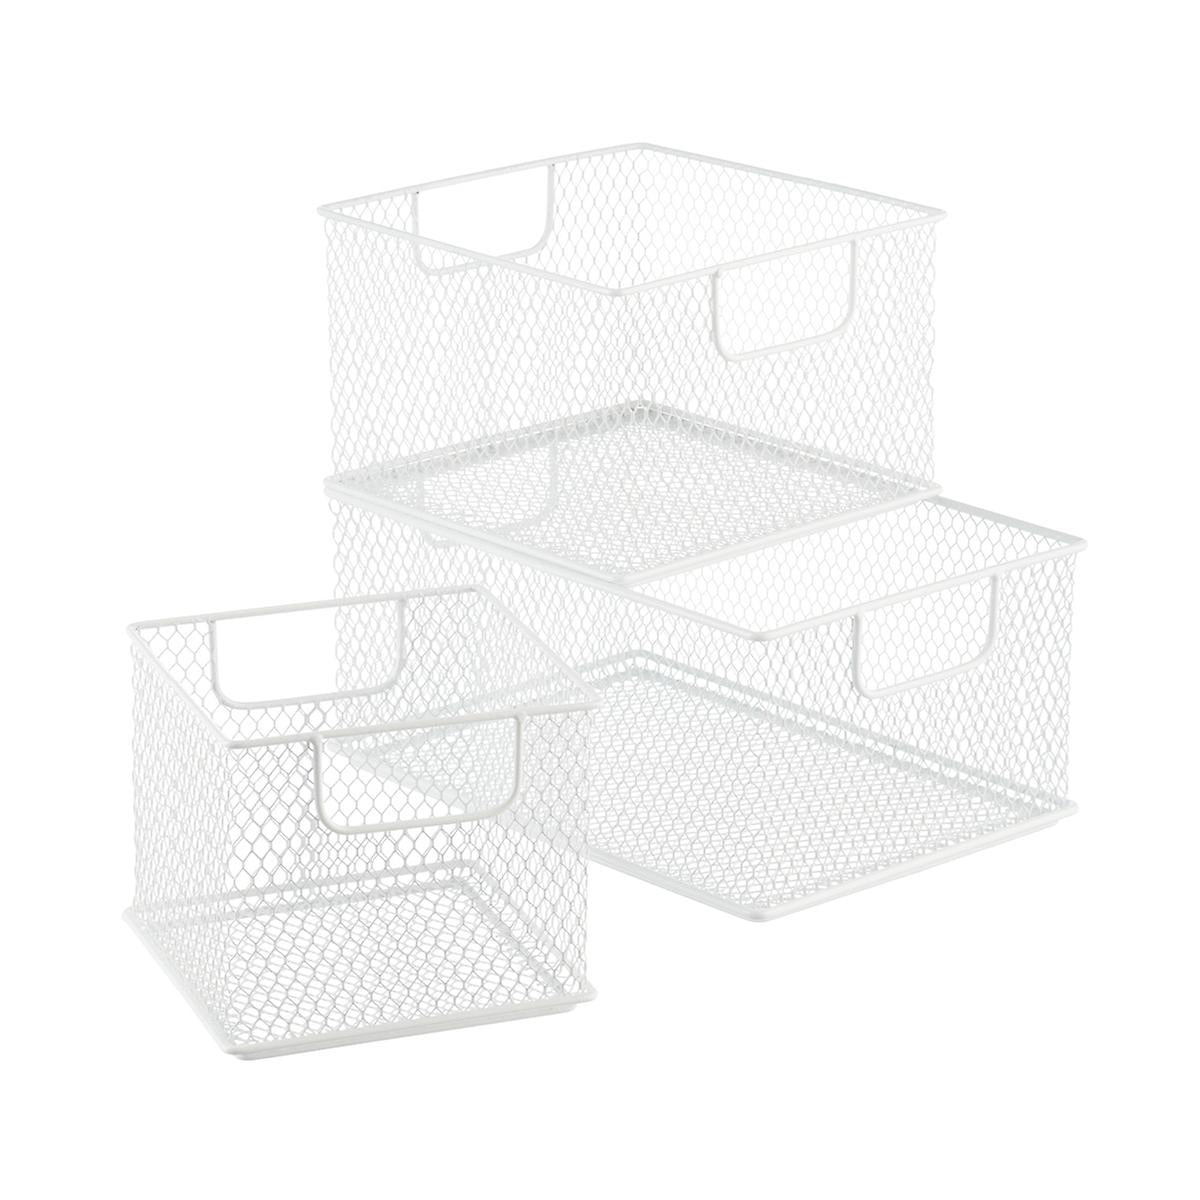 Sterilite 30 Quart Plastic Stacker Box, Lidded Storage Bin Container For  Home And Garage Organizing, Shoes, Tools, Clear Base & Gray Lid, 6-pack :  Target